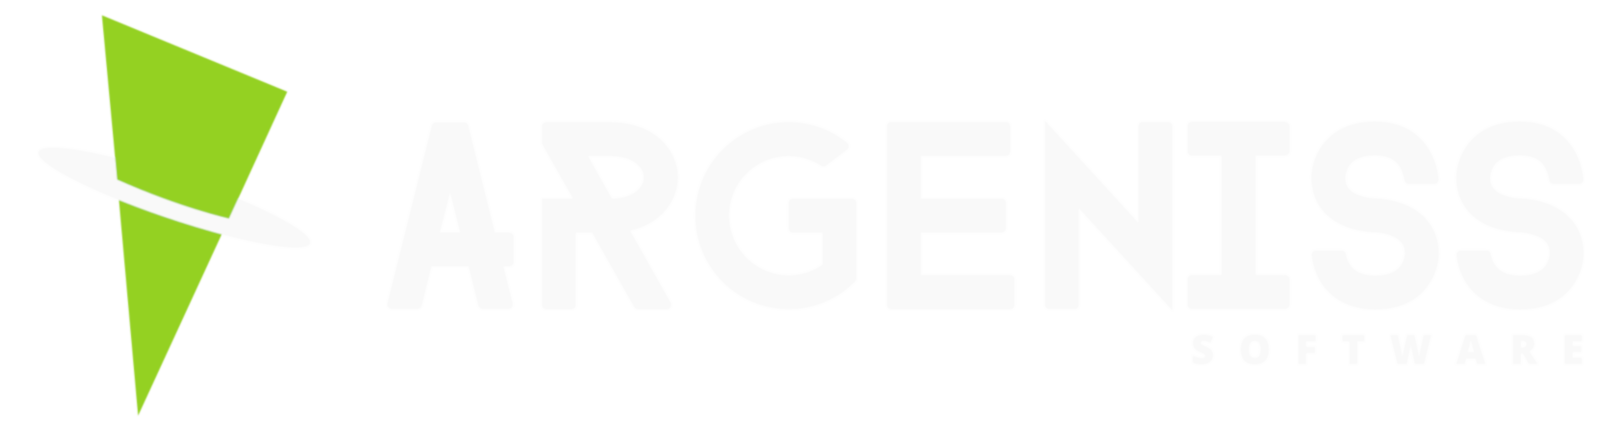 Argeniss Software